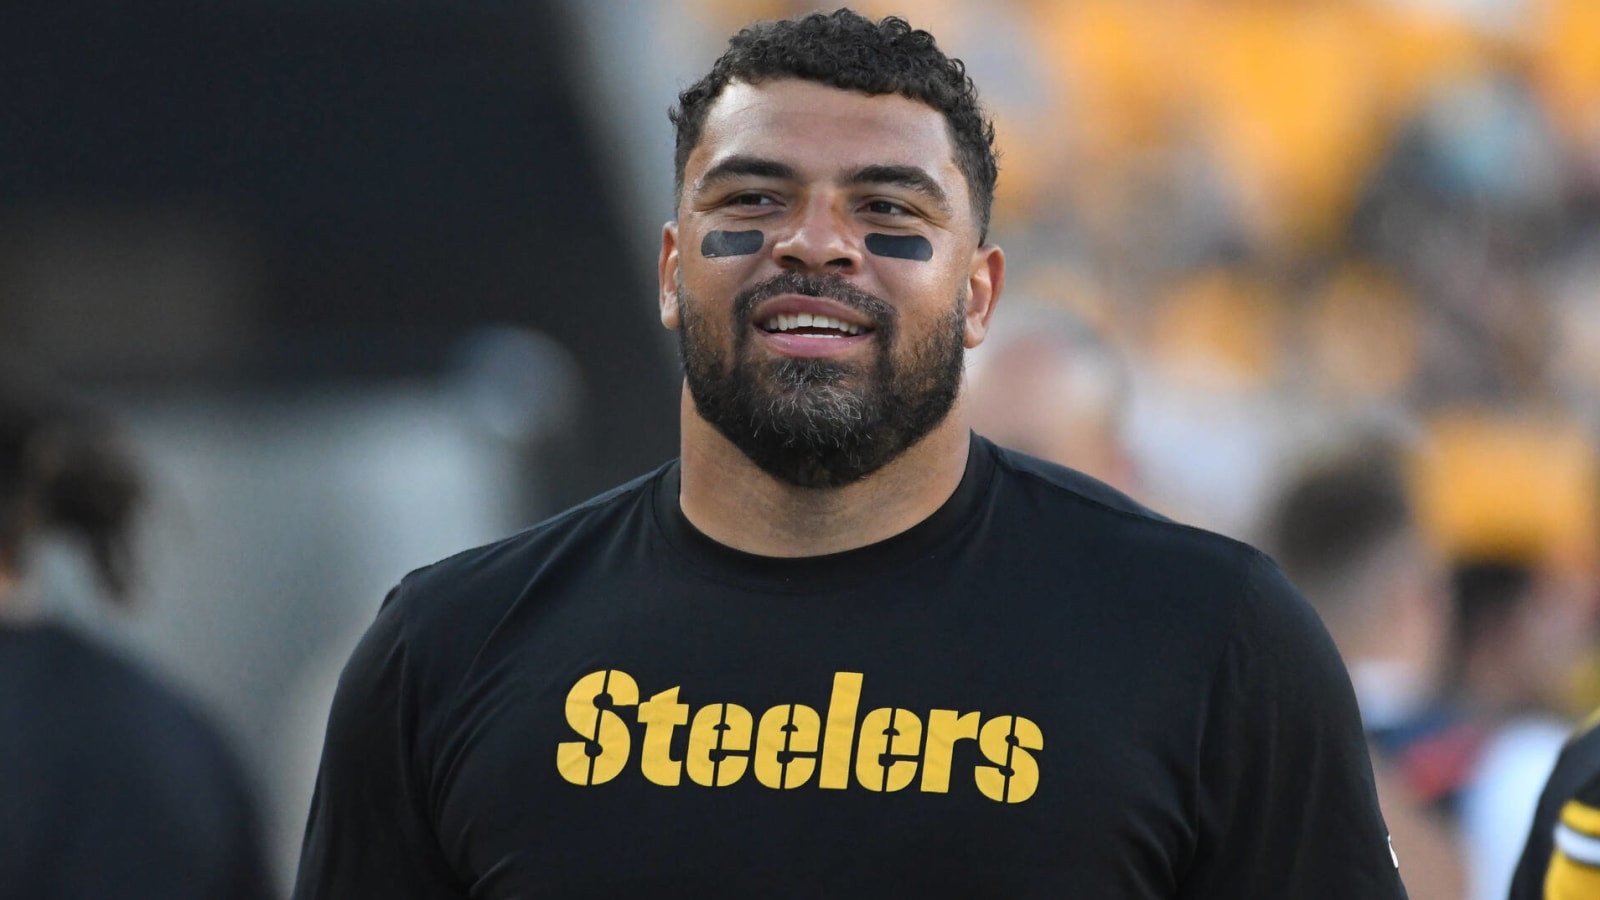 Cameron Heyward on favored Patriots: 'I don't give a damn'